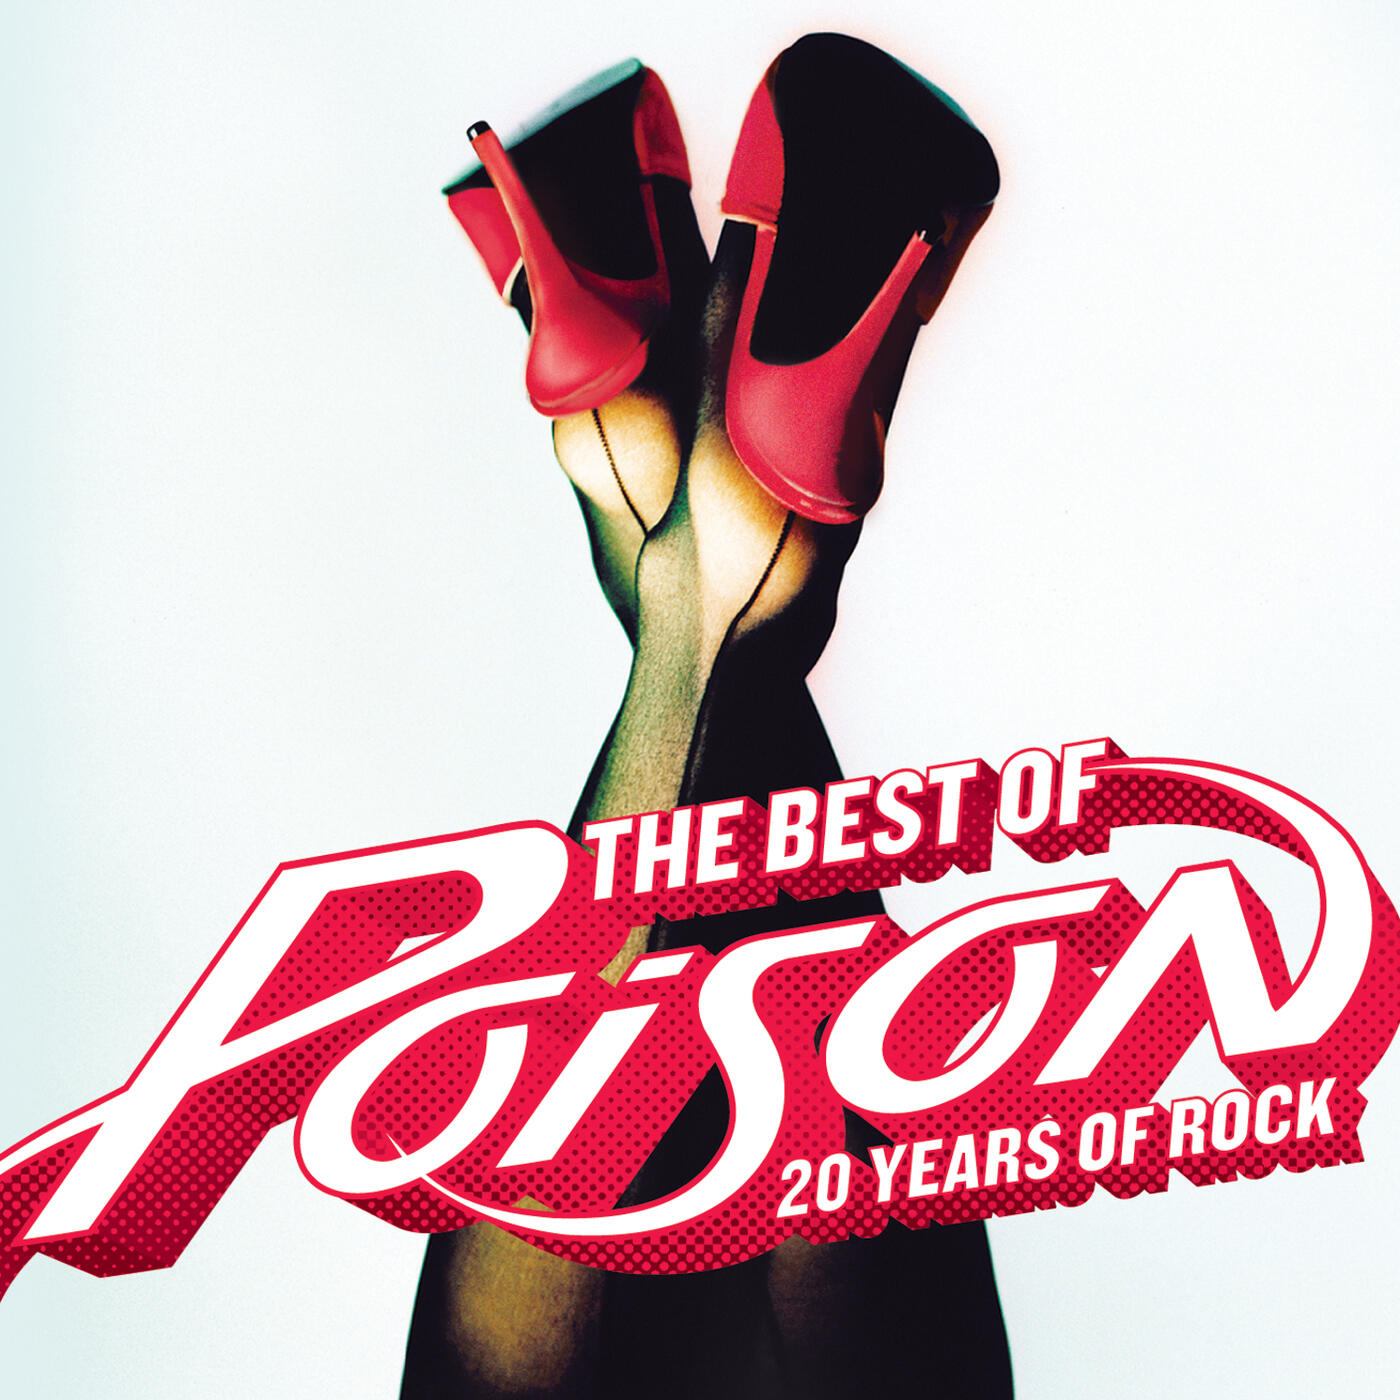 Listen Free To Poison The Best Of 20 Years Of Rock Radio On 